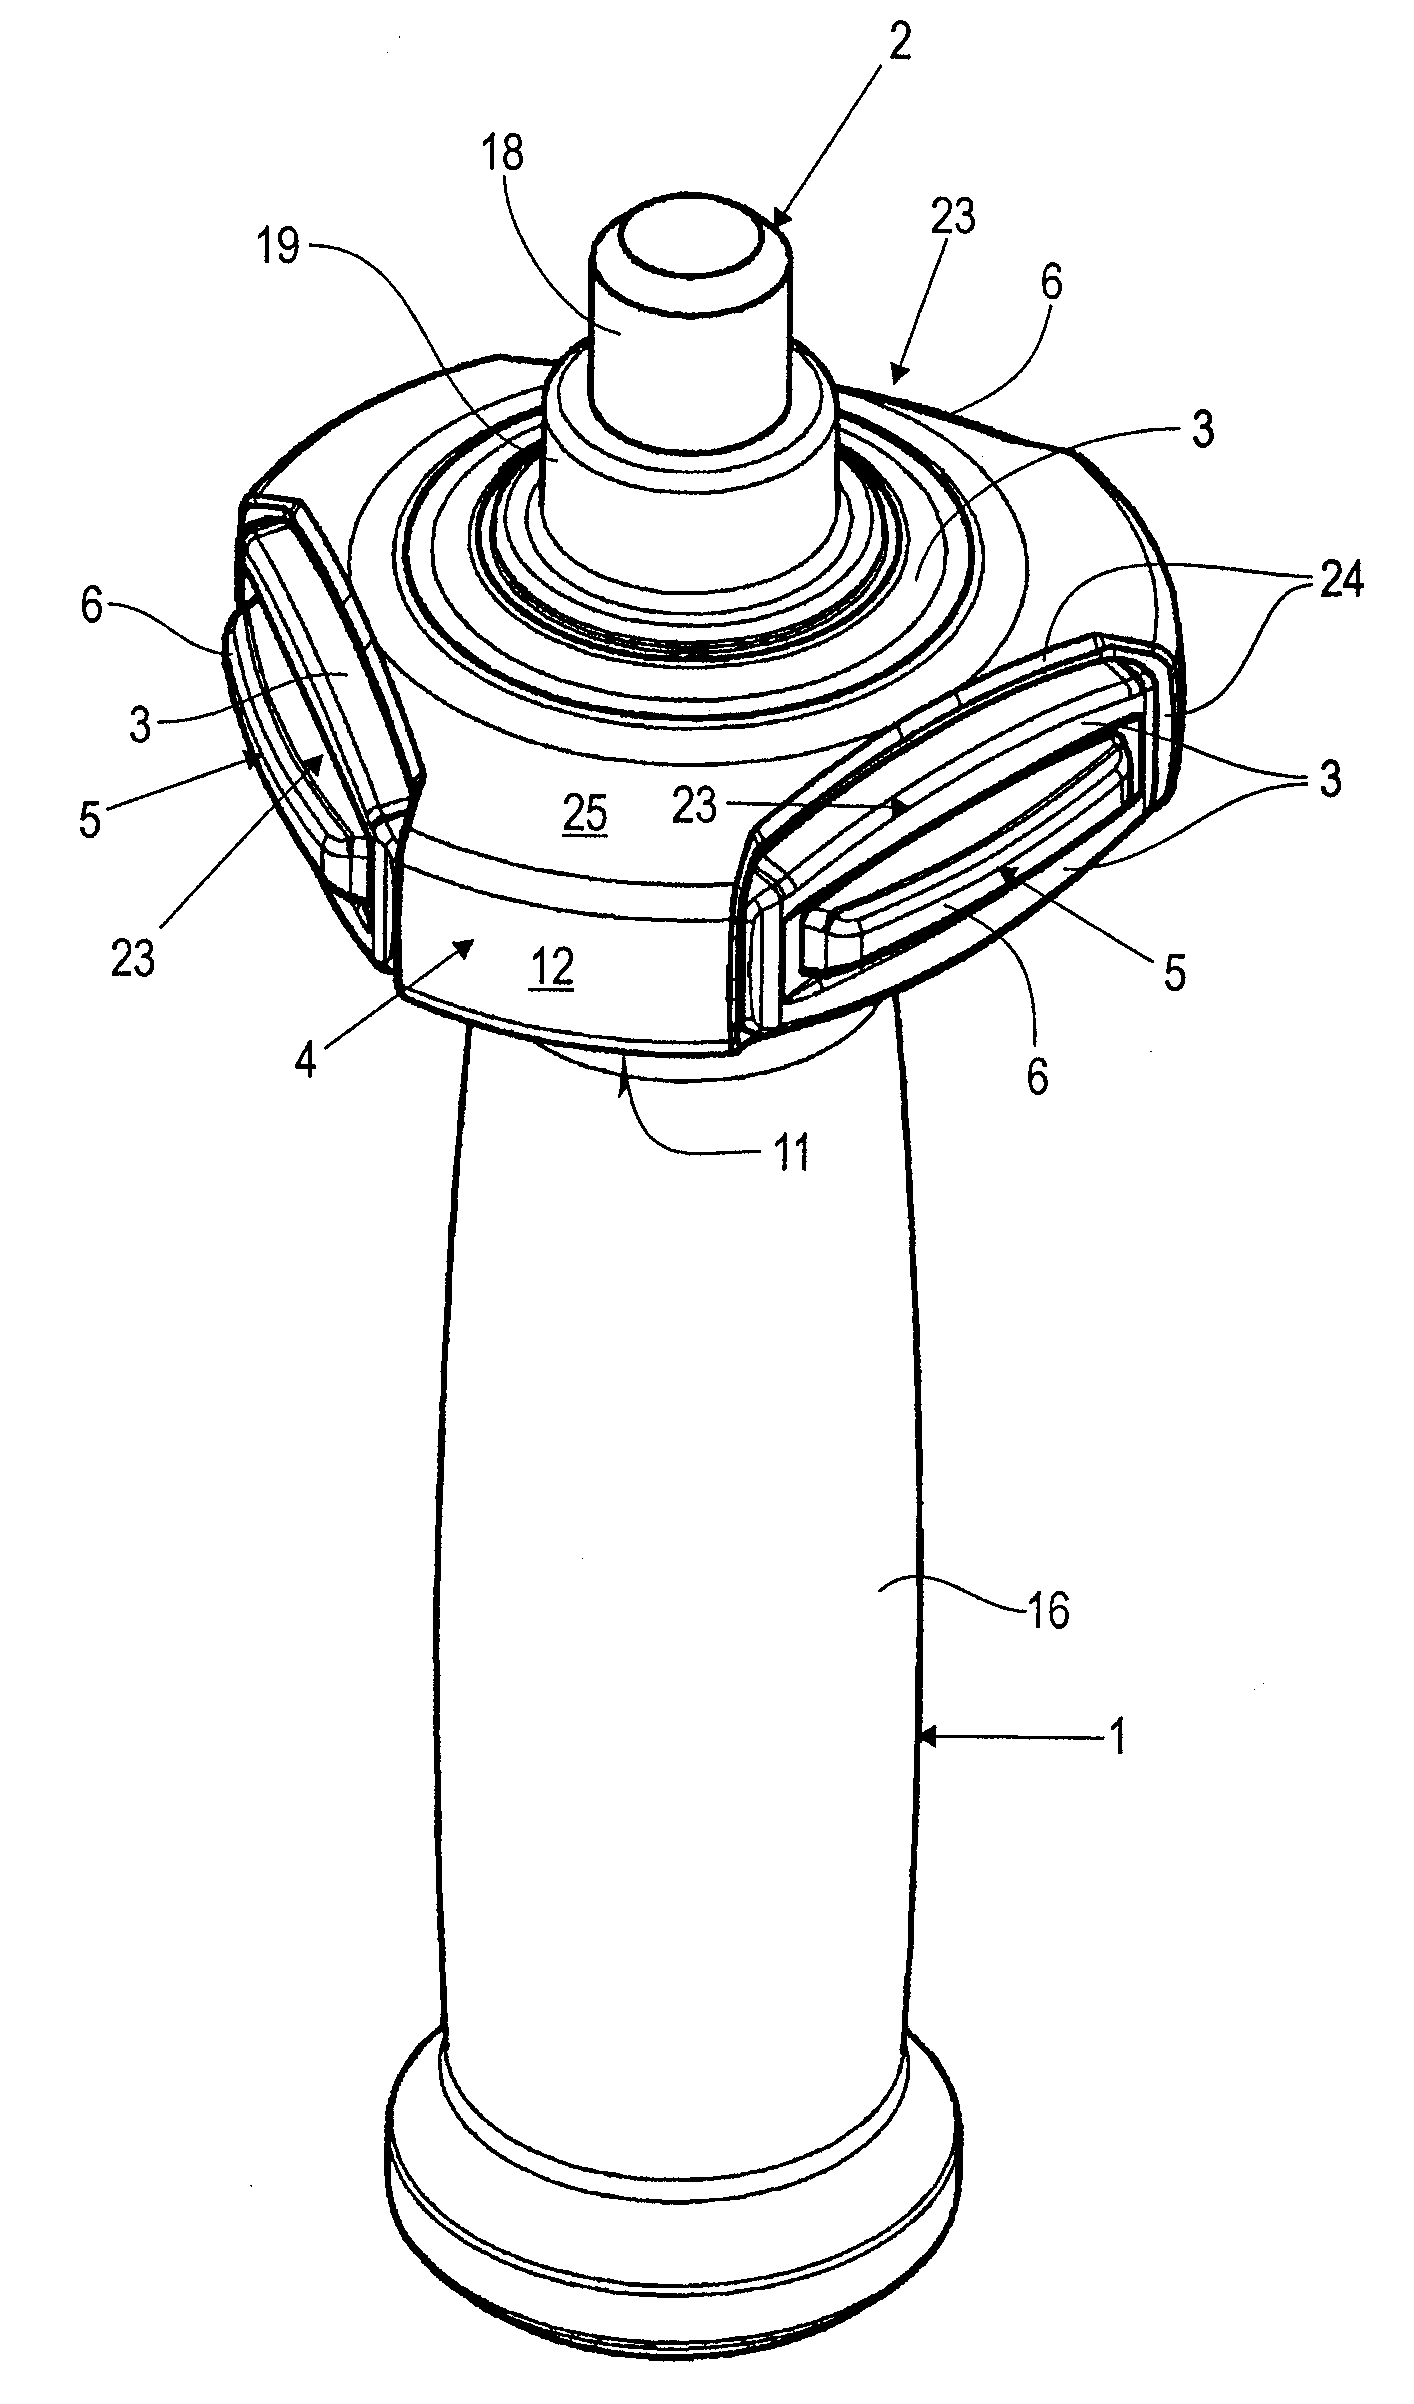 Auxiliary Handle for a Hand-Held Power Tool